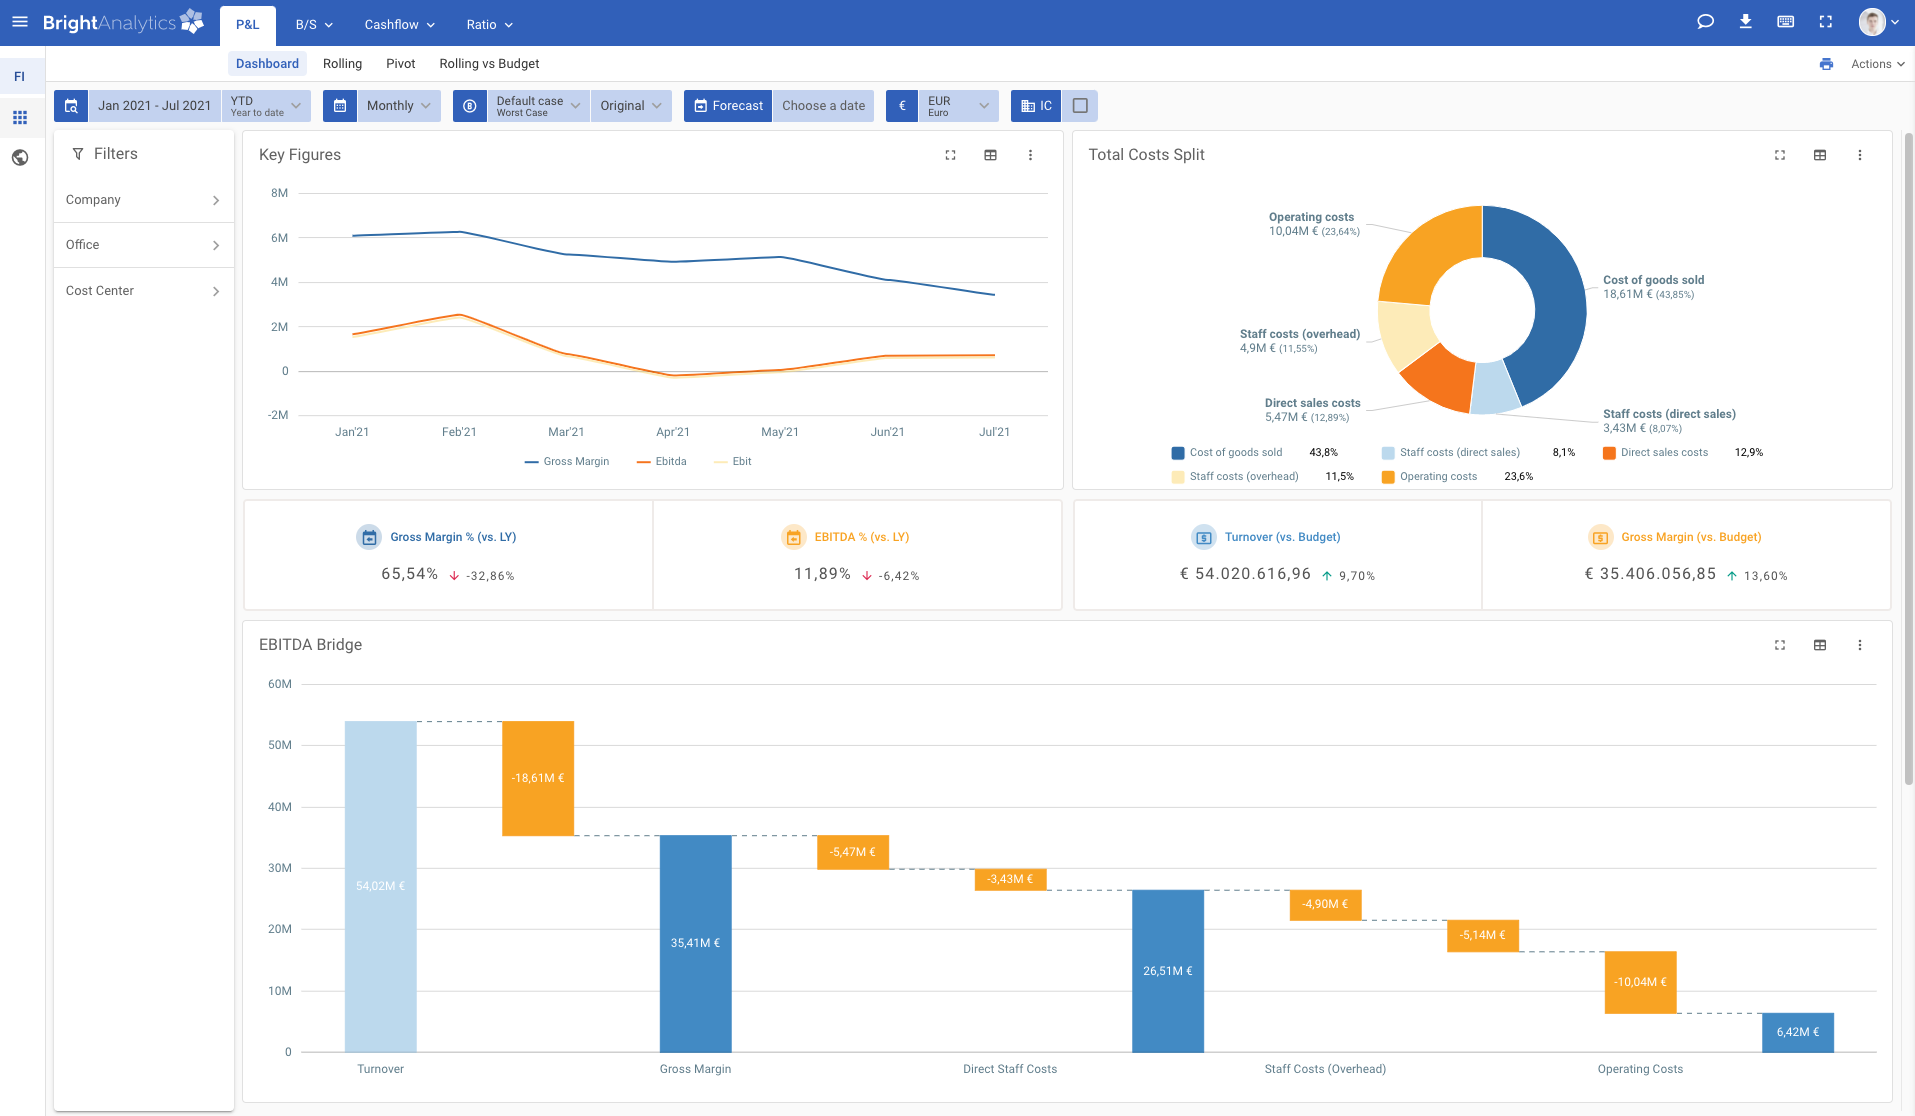 Oxceed alternative - The intuitive and user-friendly interface of BrightAnalytics